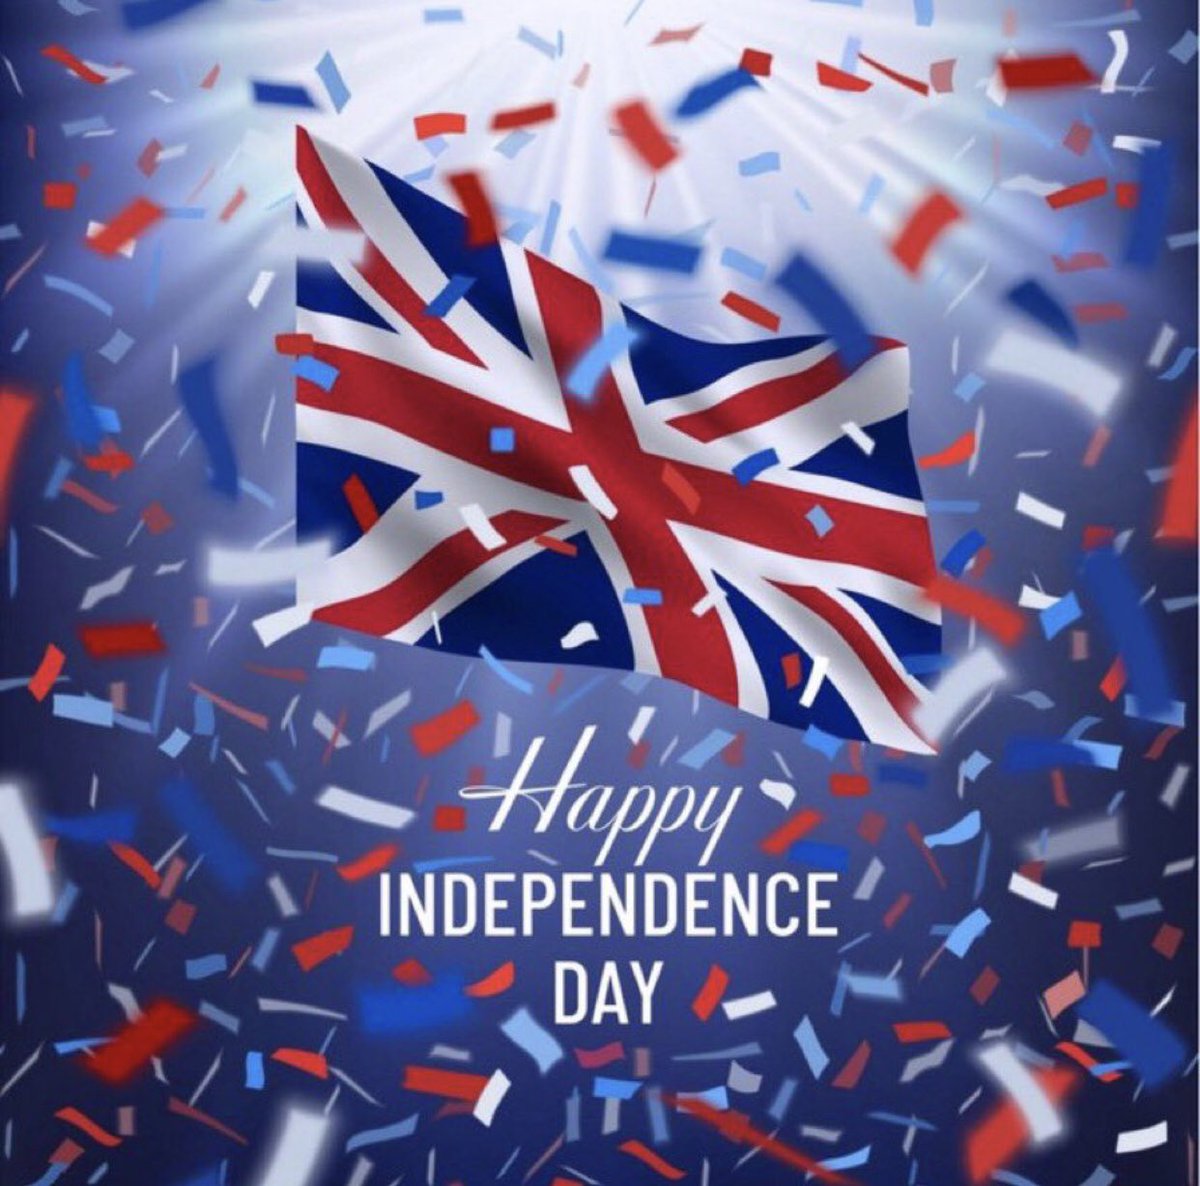 Happy Independence Day one & all!

#BrexitDay